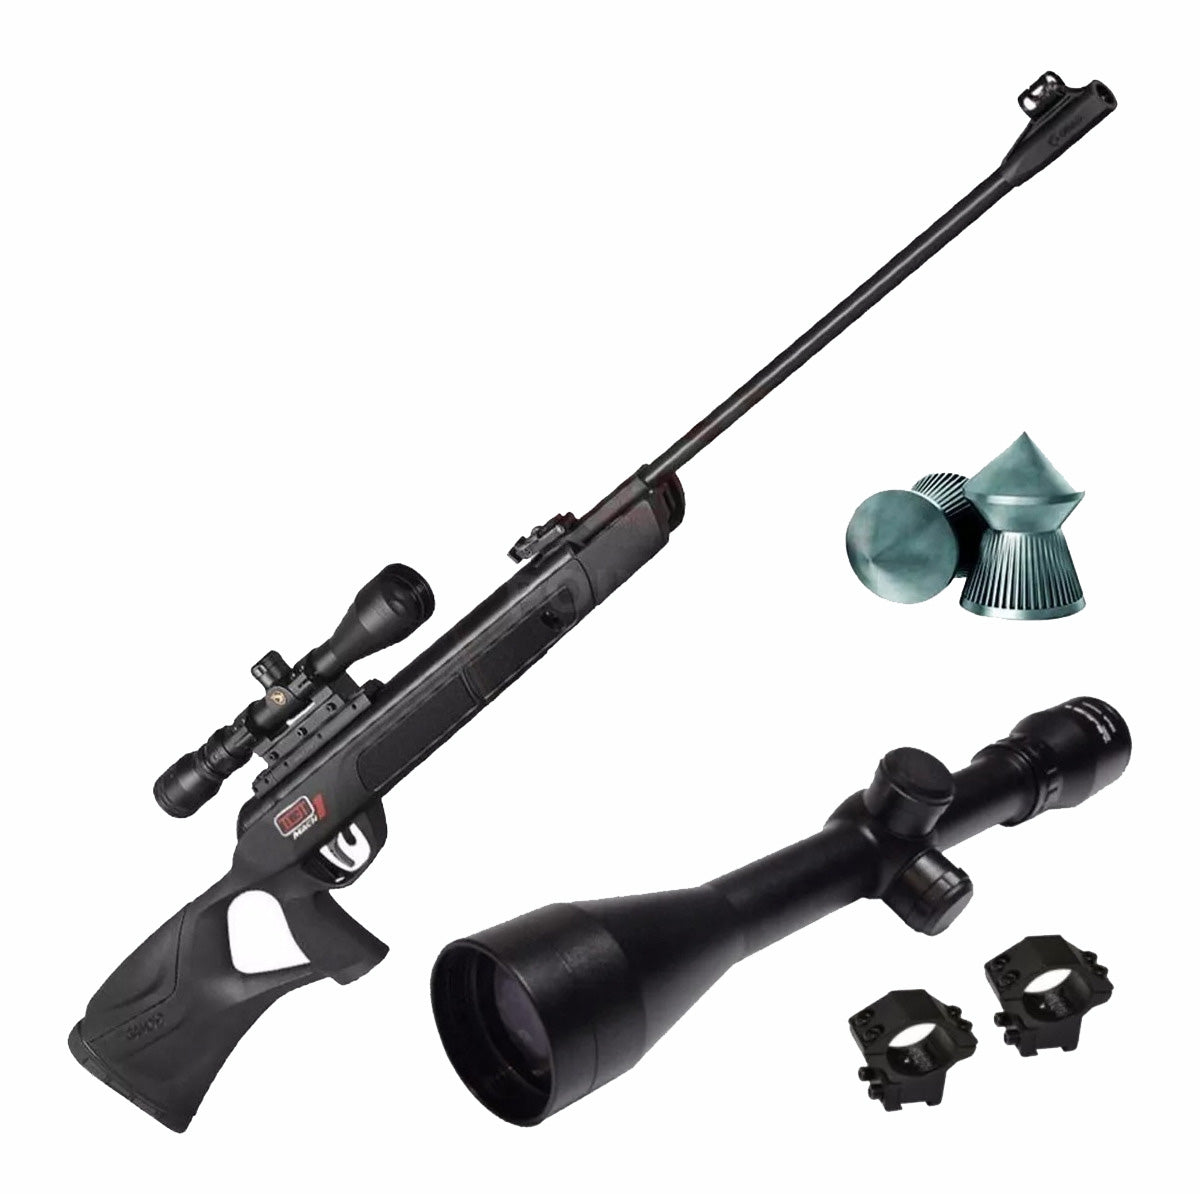 Rifle Deportivo Gamo G-magnum 1250 Igt M1 45 Joules Con mira 3-9x40 – SUIZA  + XTREME